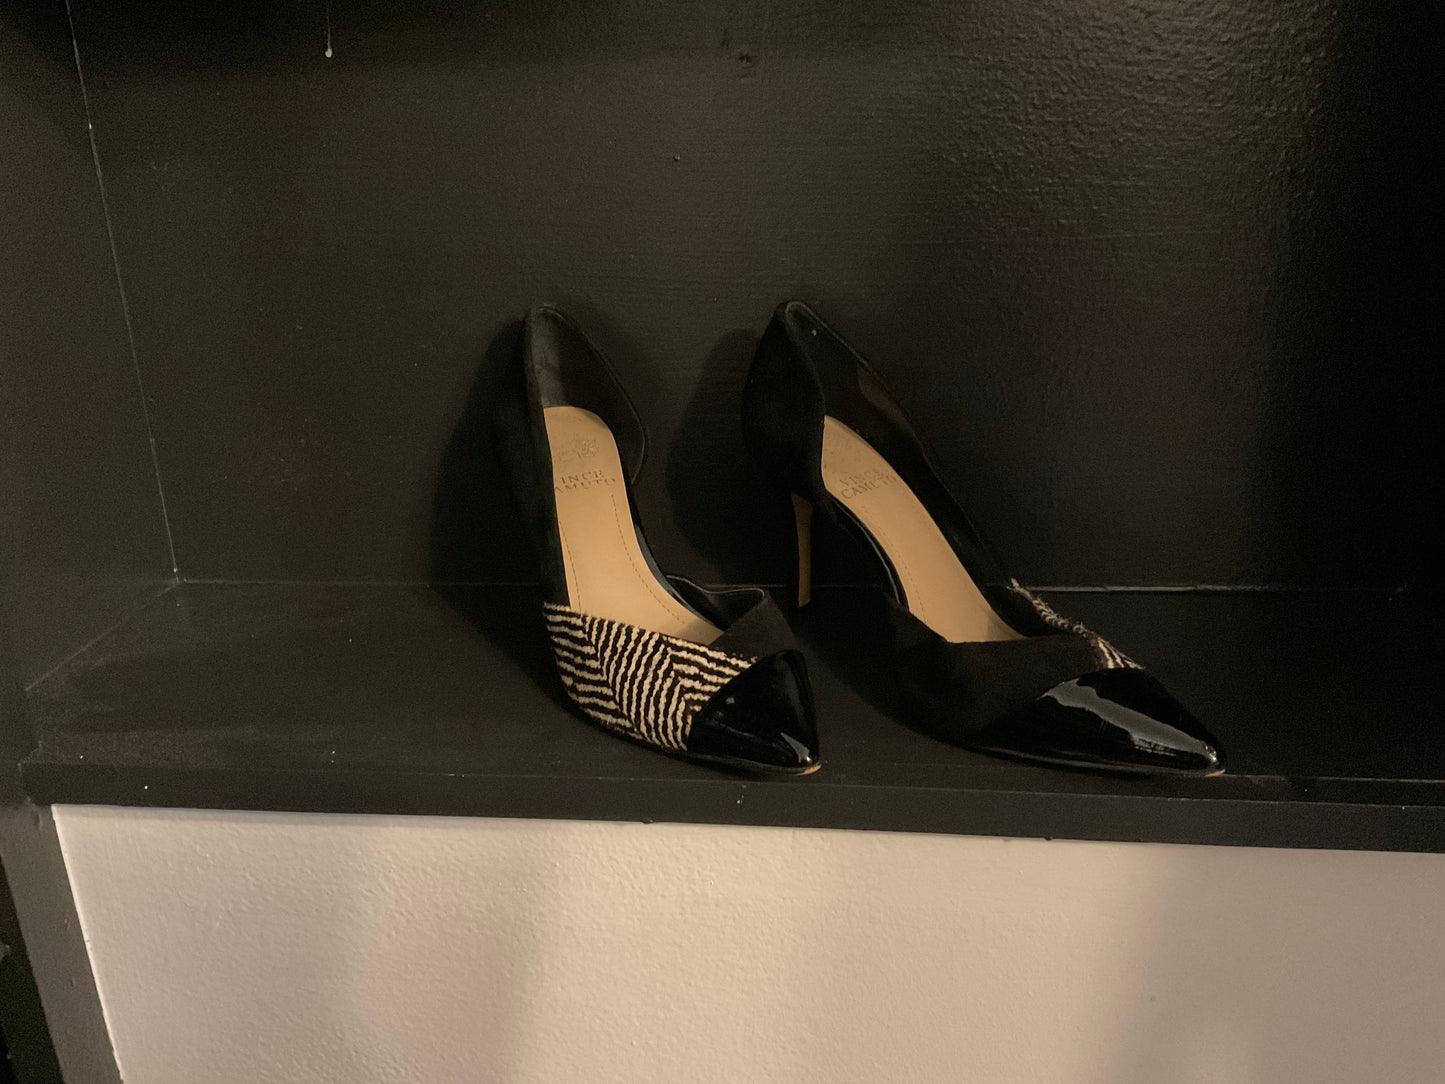 Vince Camuto black and cream pumps, 7 1/2